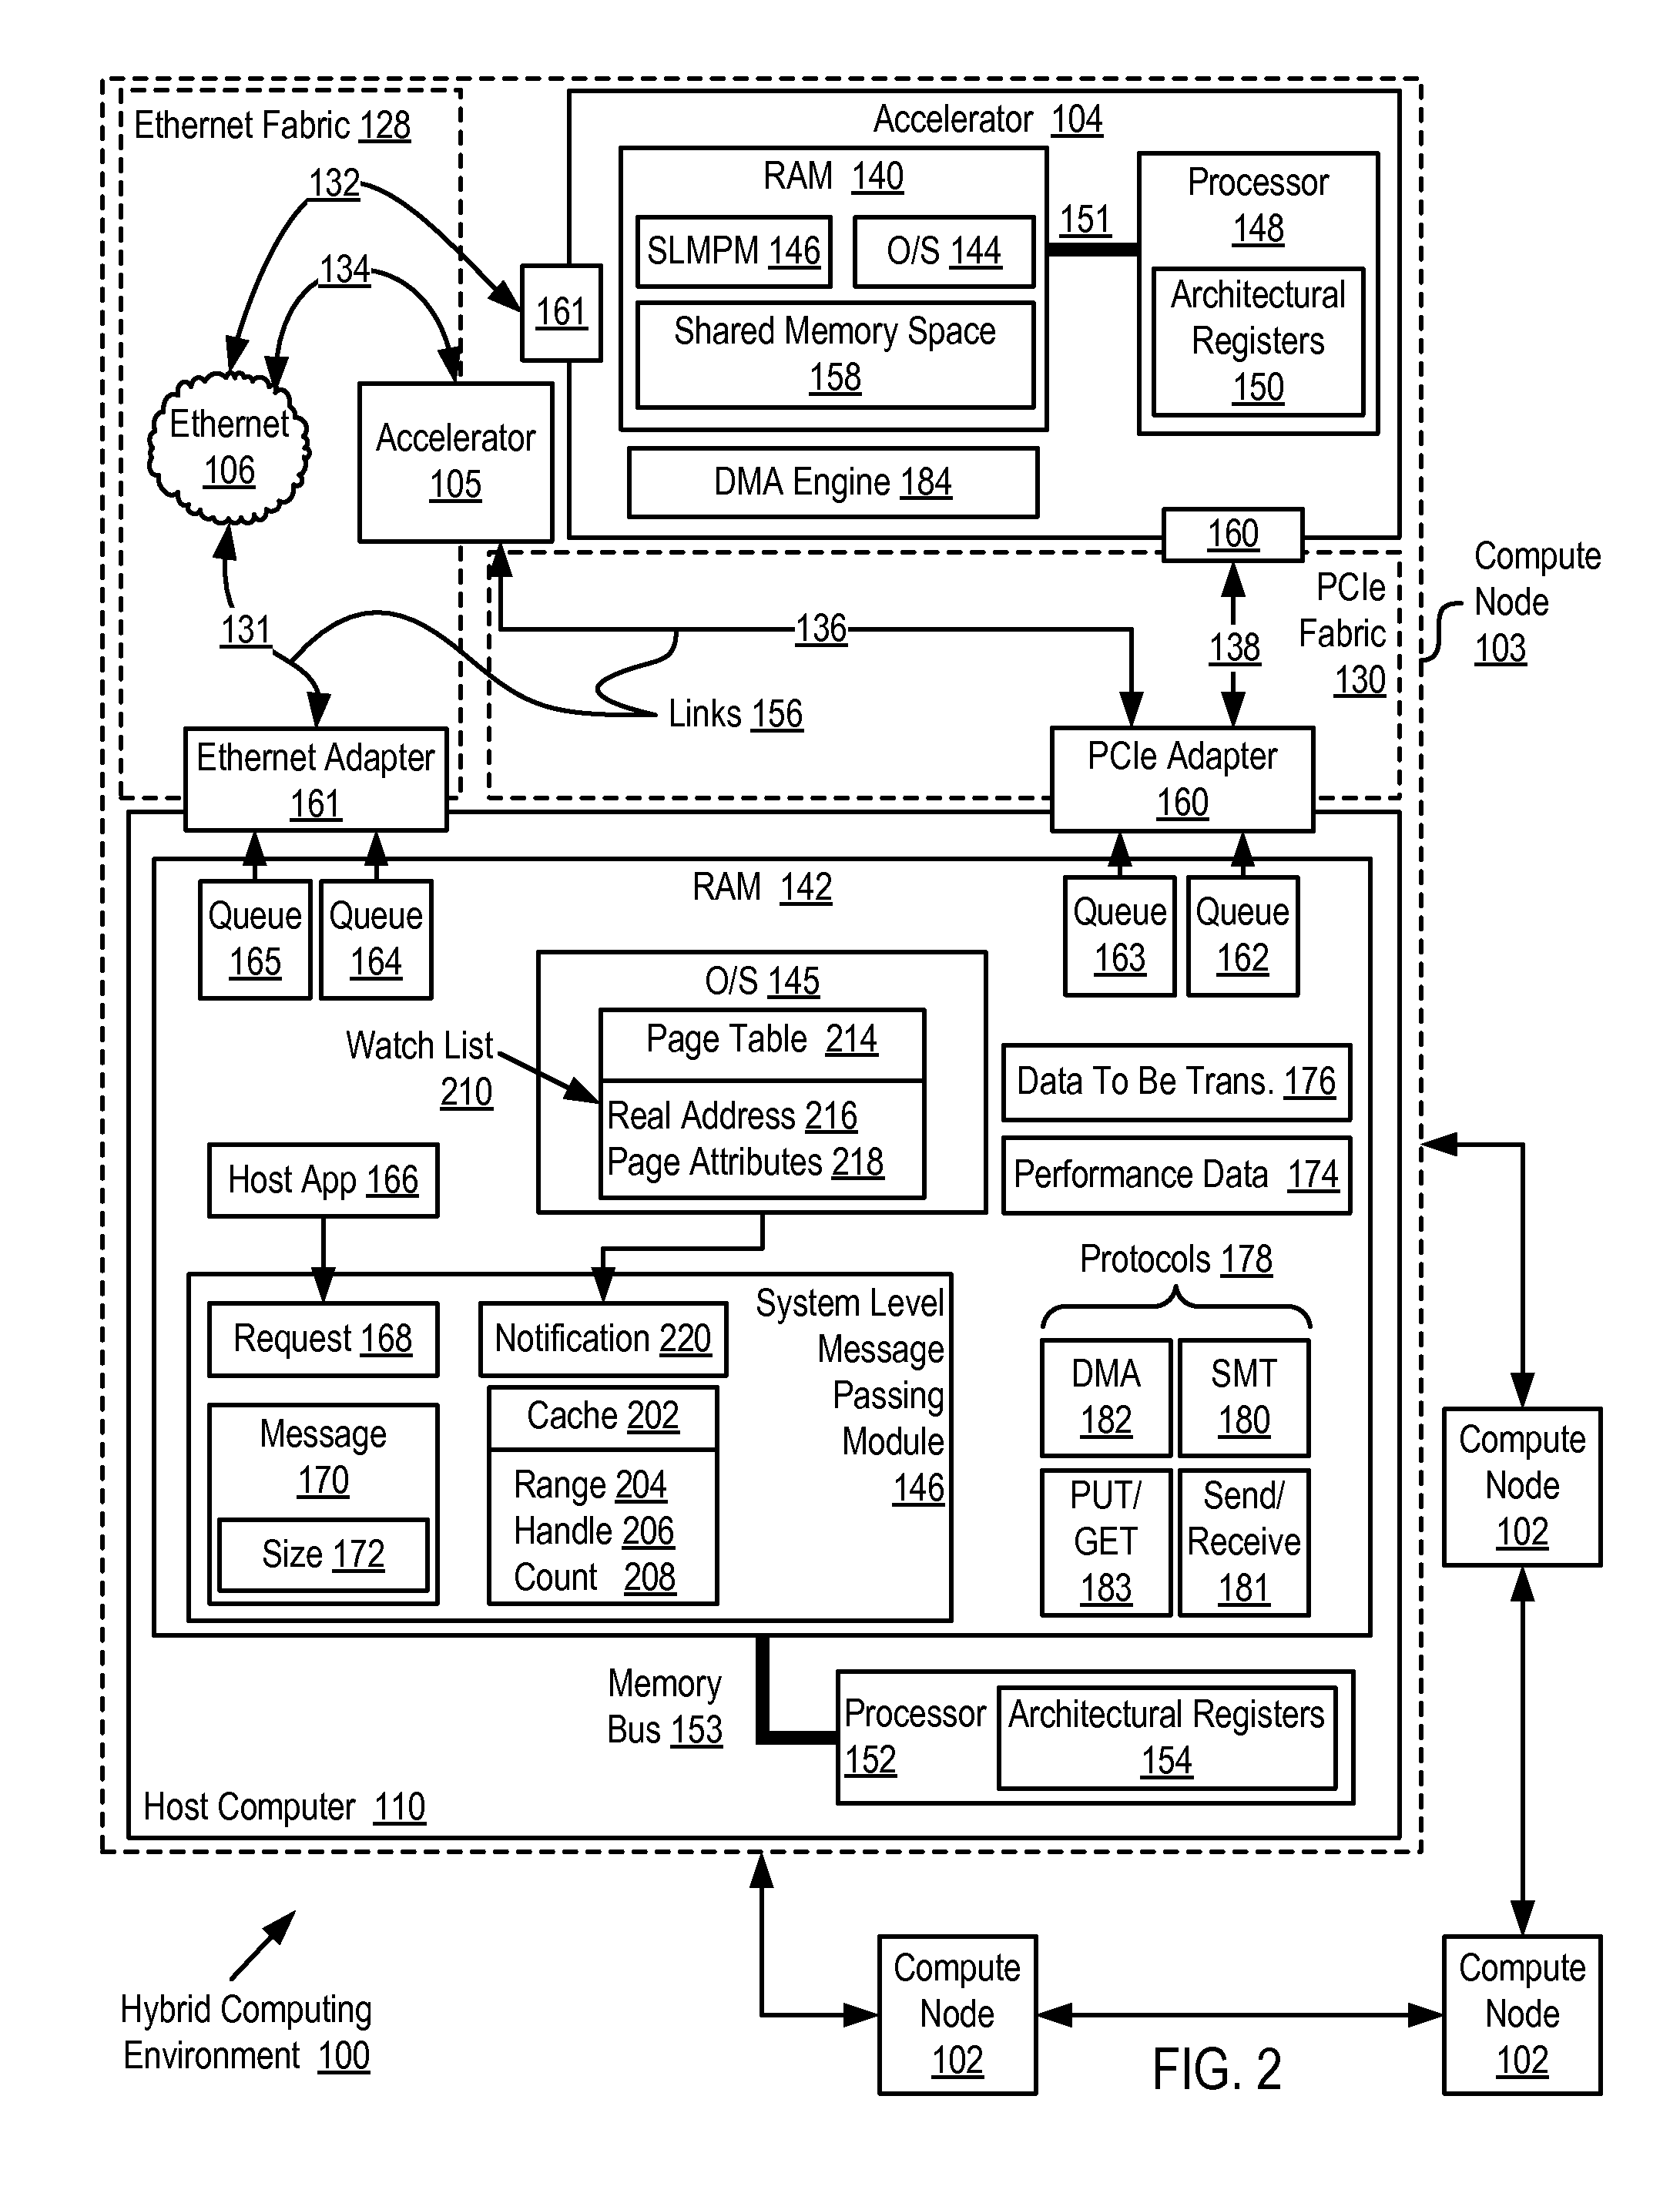 Administering Registered Virtual Addresses In A Hybrid Computing Environment Including Maintaining A Watch List Of Currently Registered Virtual Addresses By An Operating System